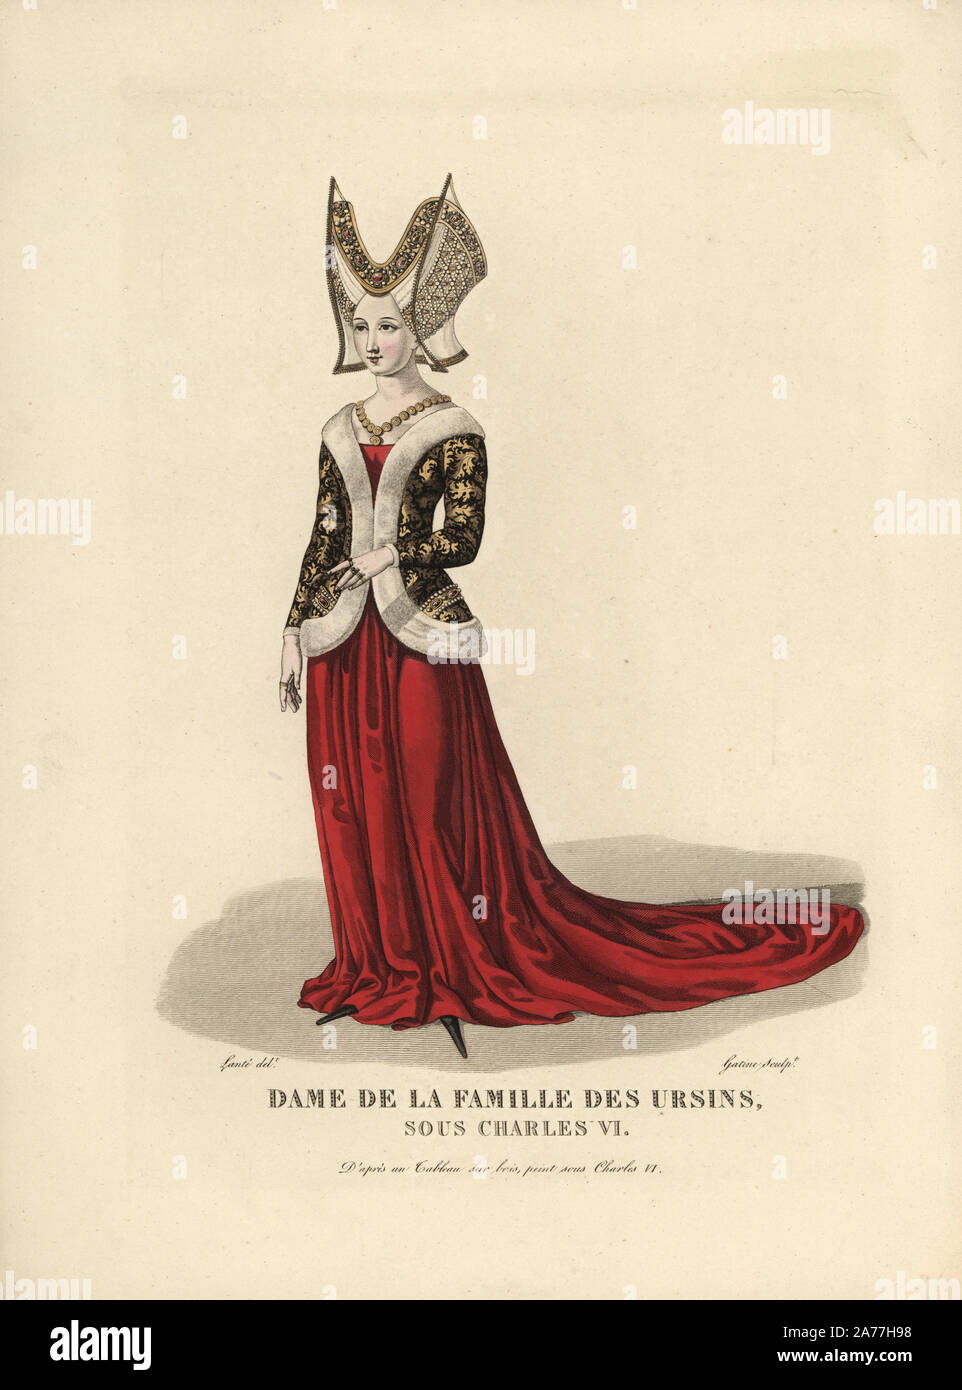 Lady of the noble Ursin family under King Charles VI of France, 14th century. After a contemporary painting on wood. Handcoloured copperplate engraving by Gatine after an illustration by Louis Marie Lante from Pierre de la Mesangere's 'Costumes des femmes celebres' (Costumes of Famous Women), Paris, 1827. Stock Photo